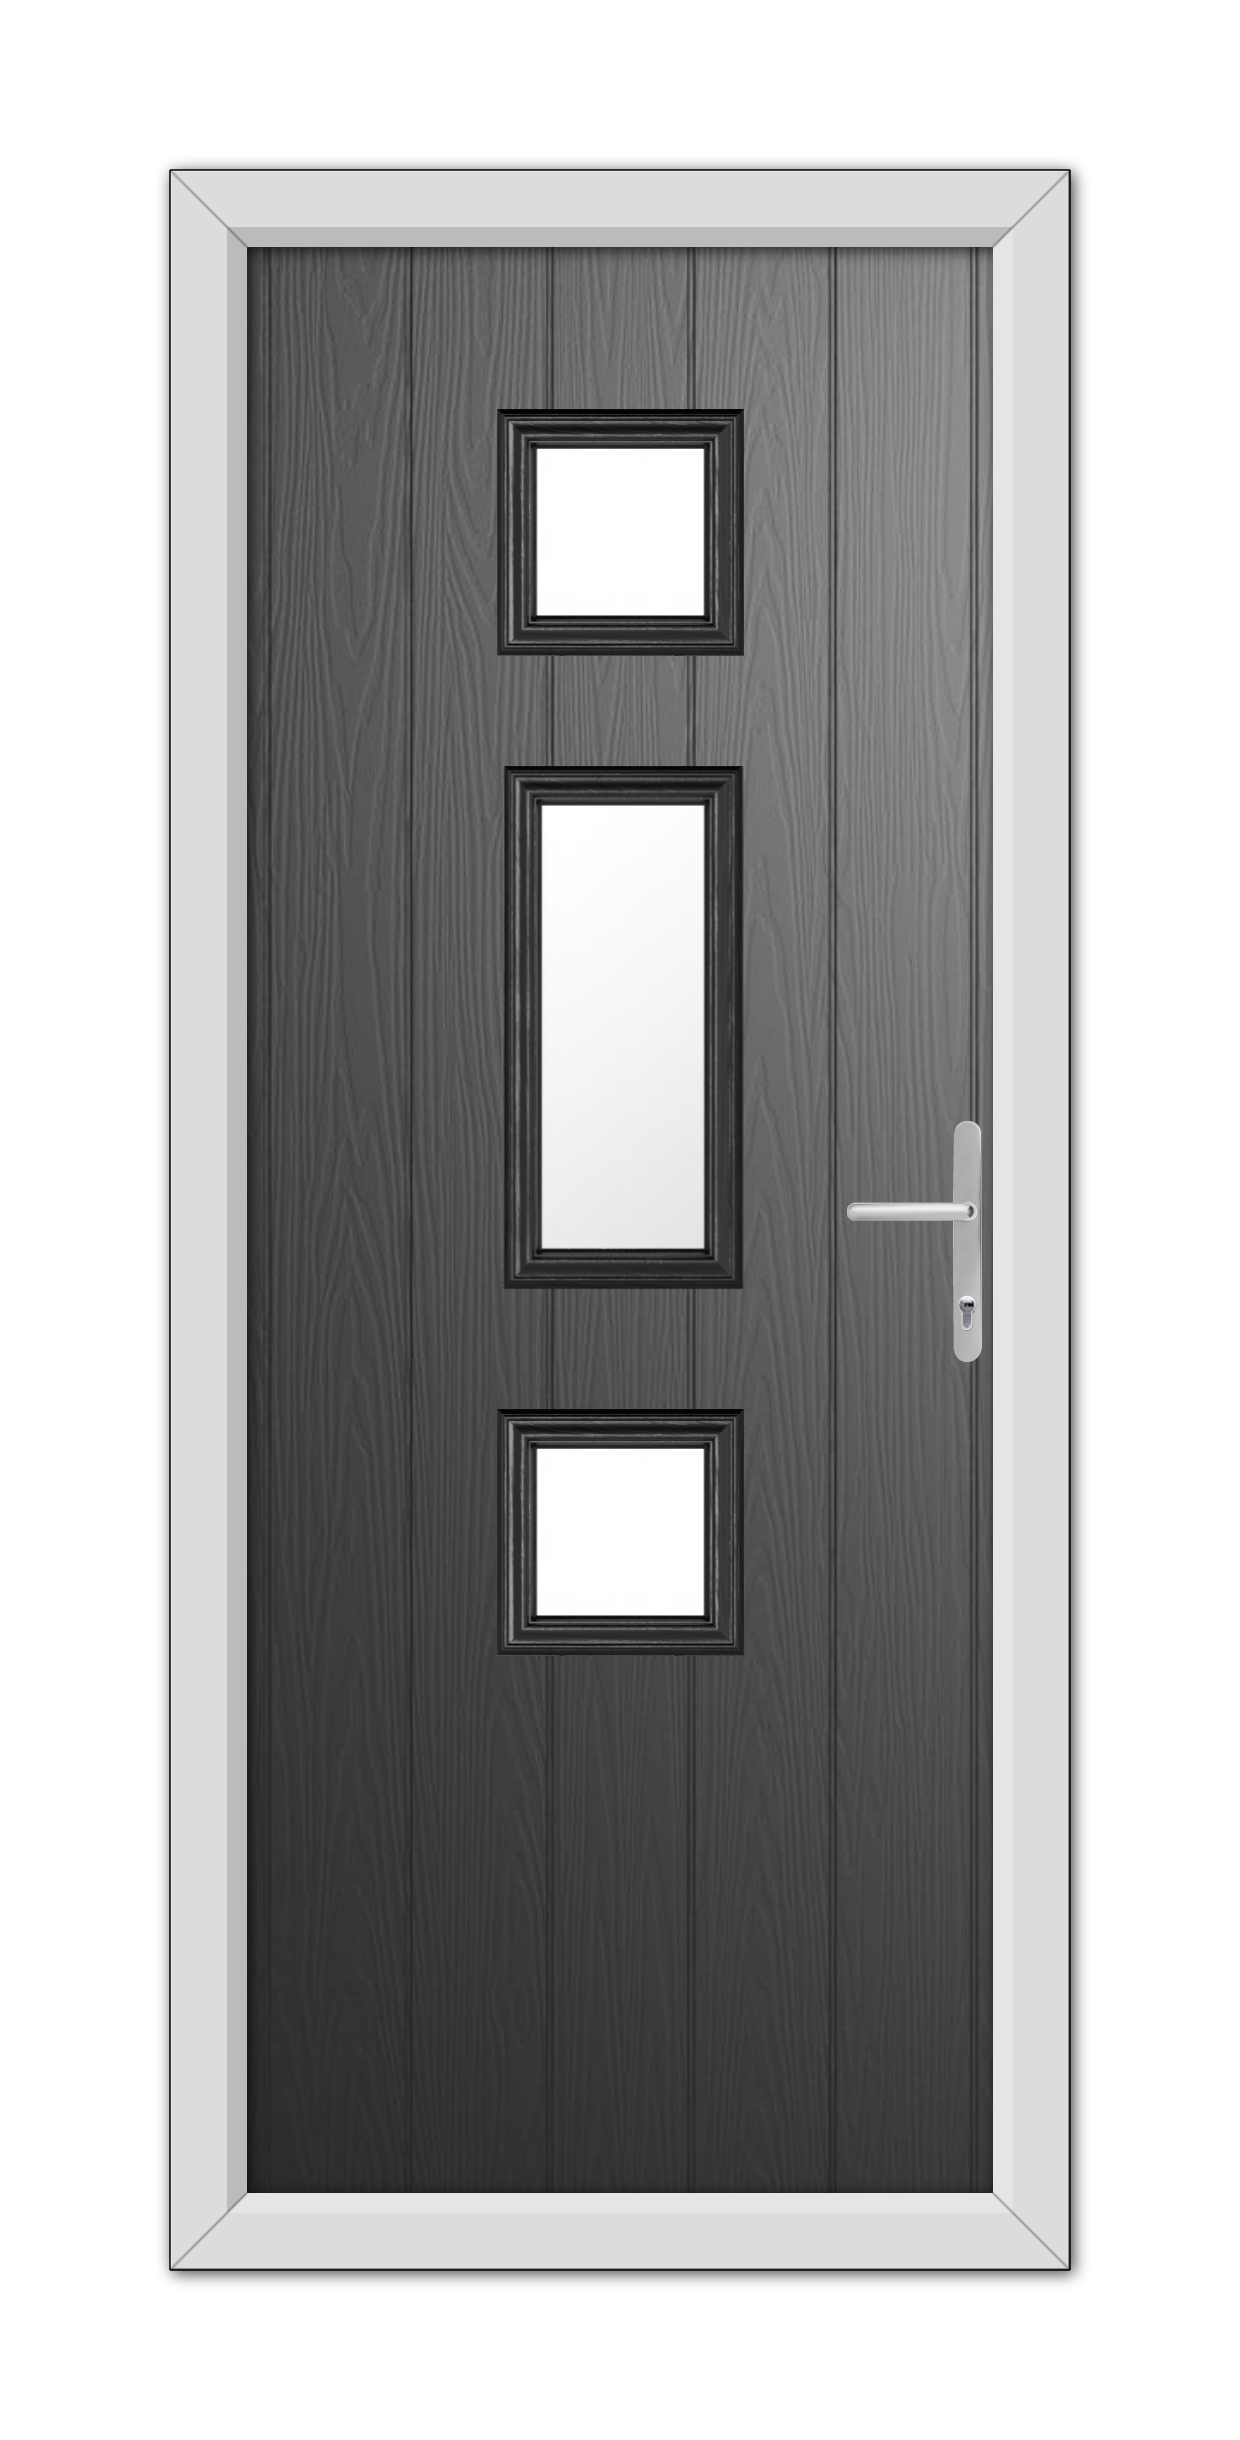 A modern Black York Composite Door 48mm Timber Core with three rectangular glass panels and a metallic handle, set within a white frame.